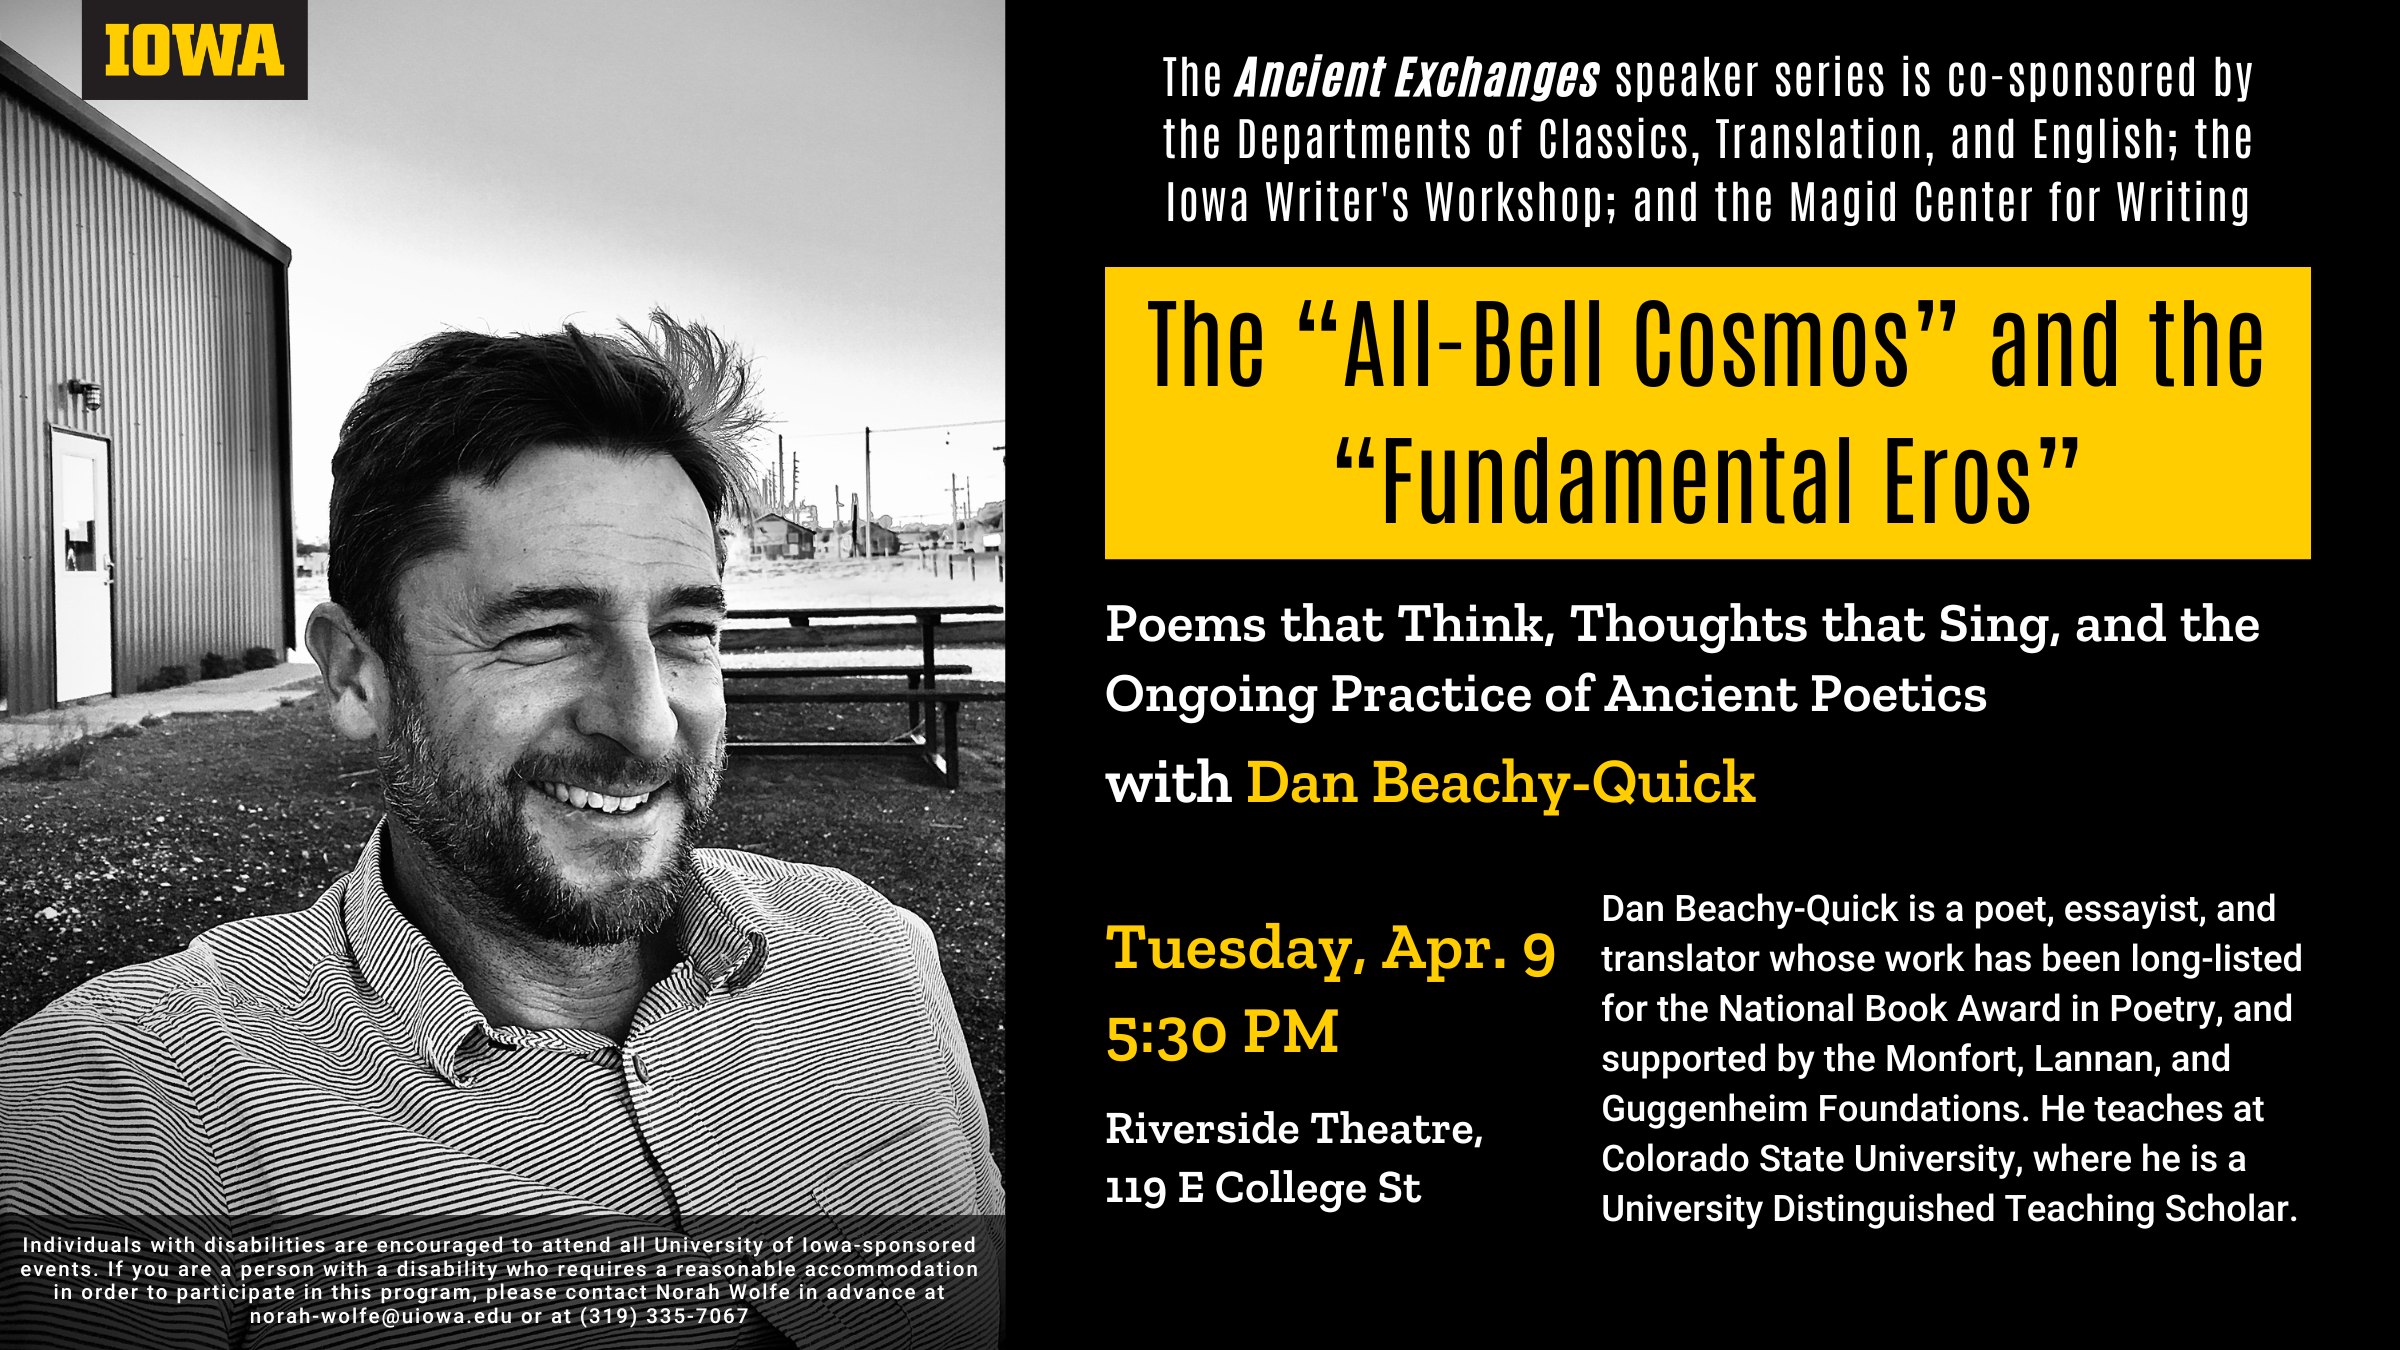 Tuesday, April 9th at 5:30 pm in the Riverside Theatre, Dan Beachy-Quick will give a lecture